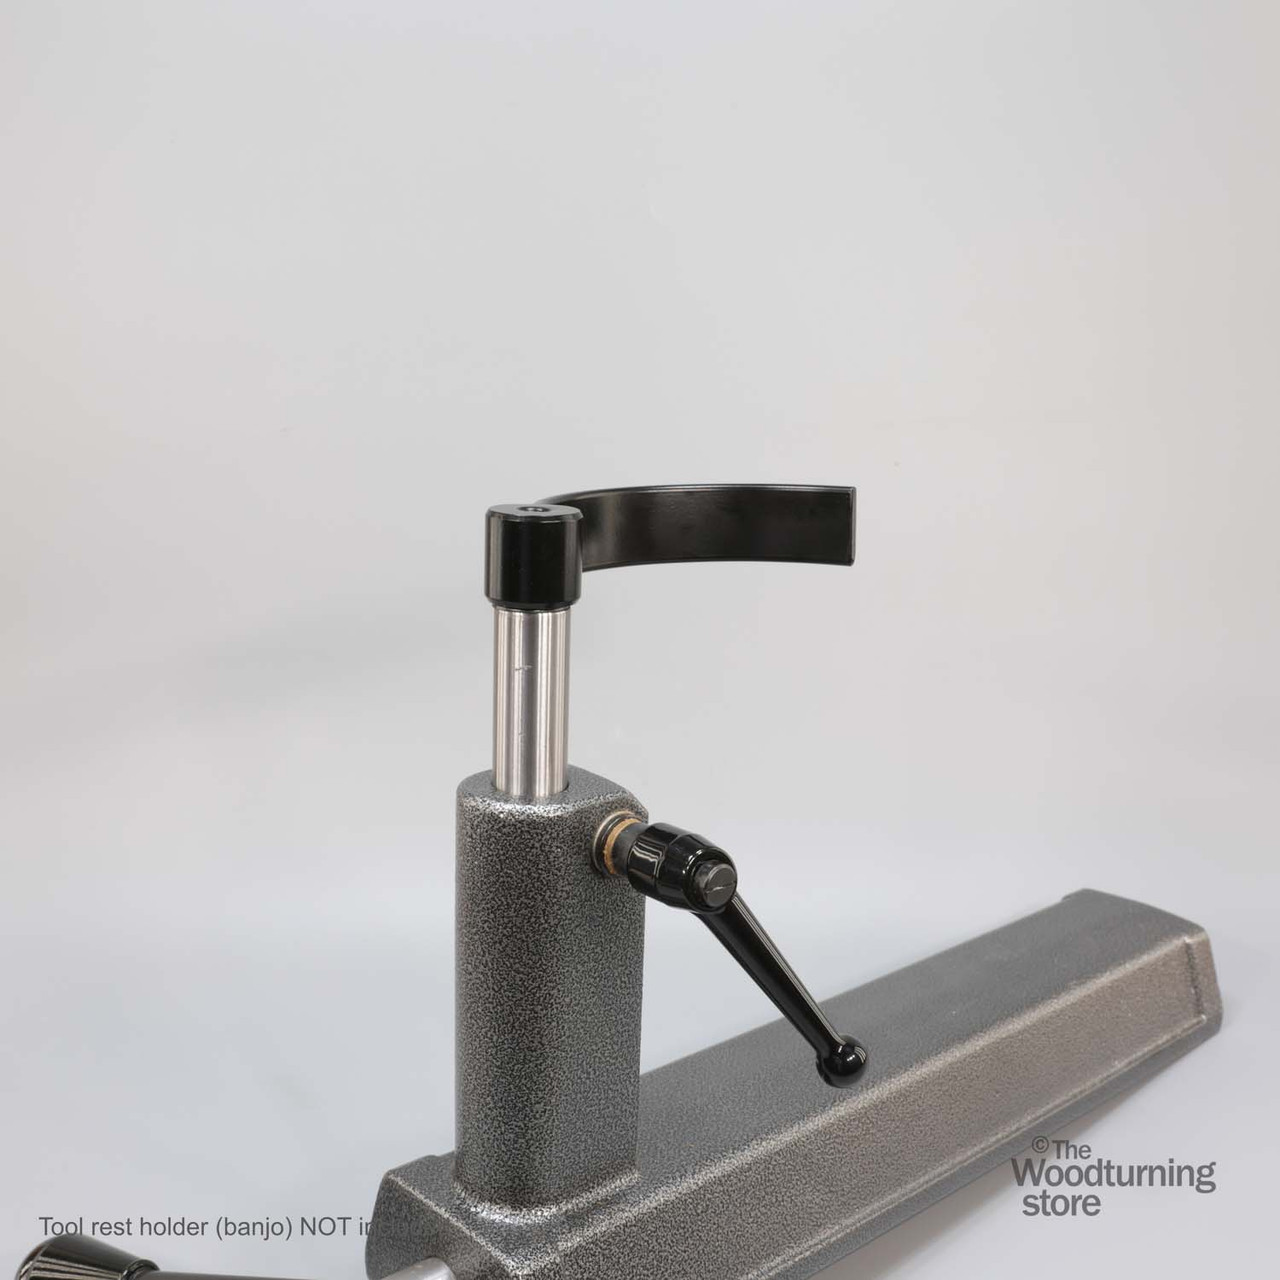 Hurricane, 5" Diameter Curved Tool Rest For Small Bowls, 4" Post Length